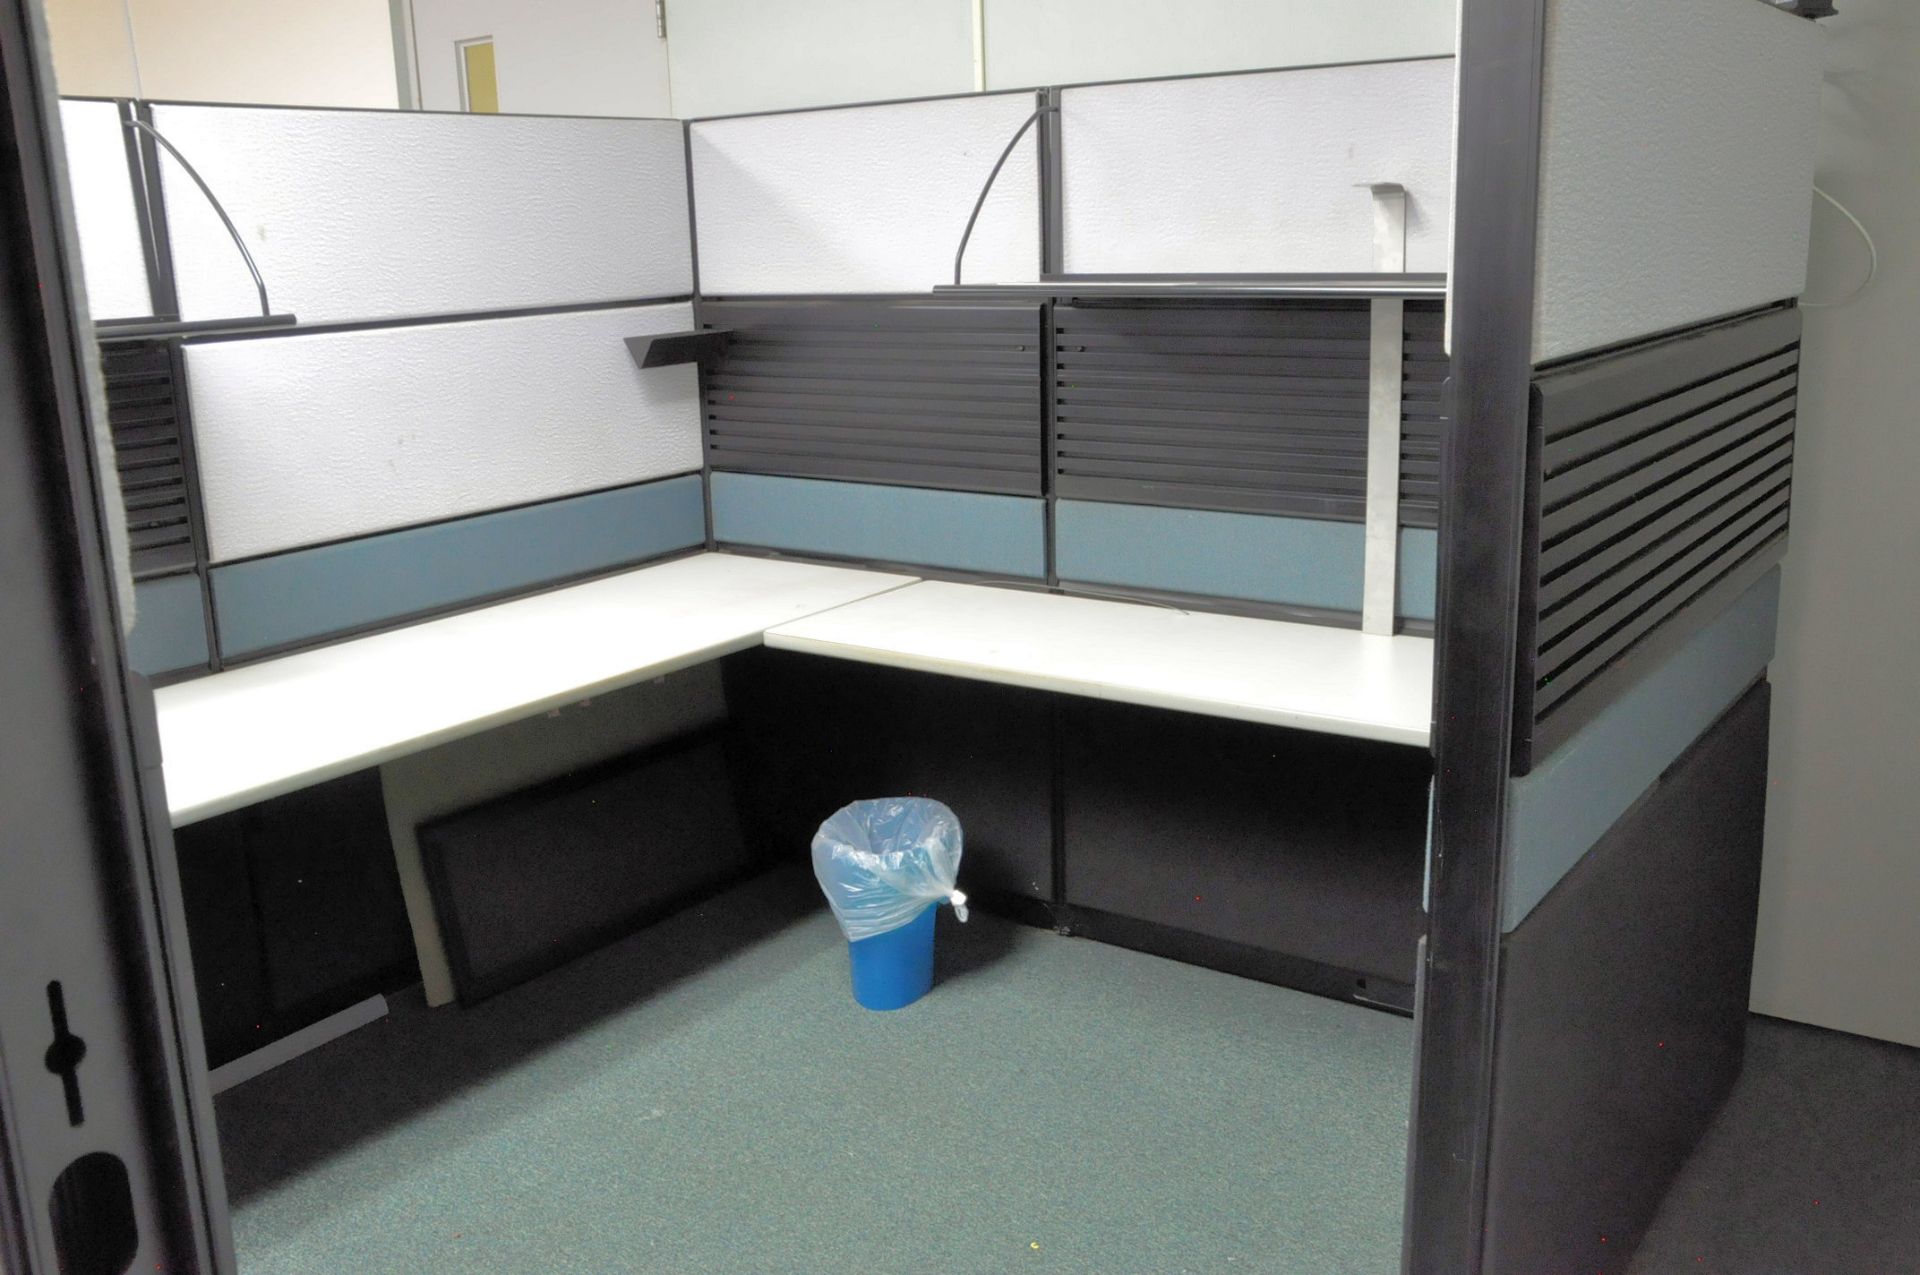 Cubical Partition Work System and Cubicle Panels in (1) Room, (Furniture Not Included) - Image 2 of 3